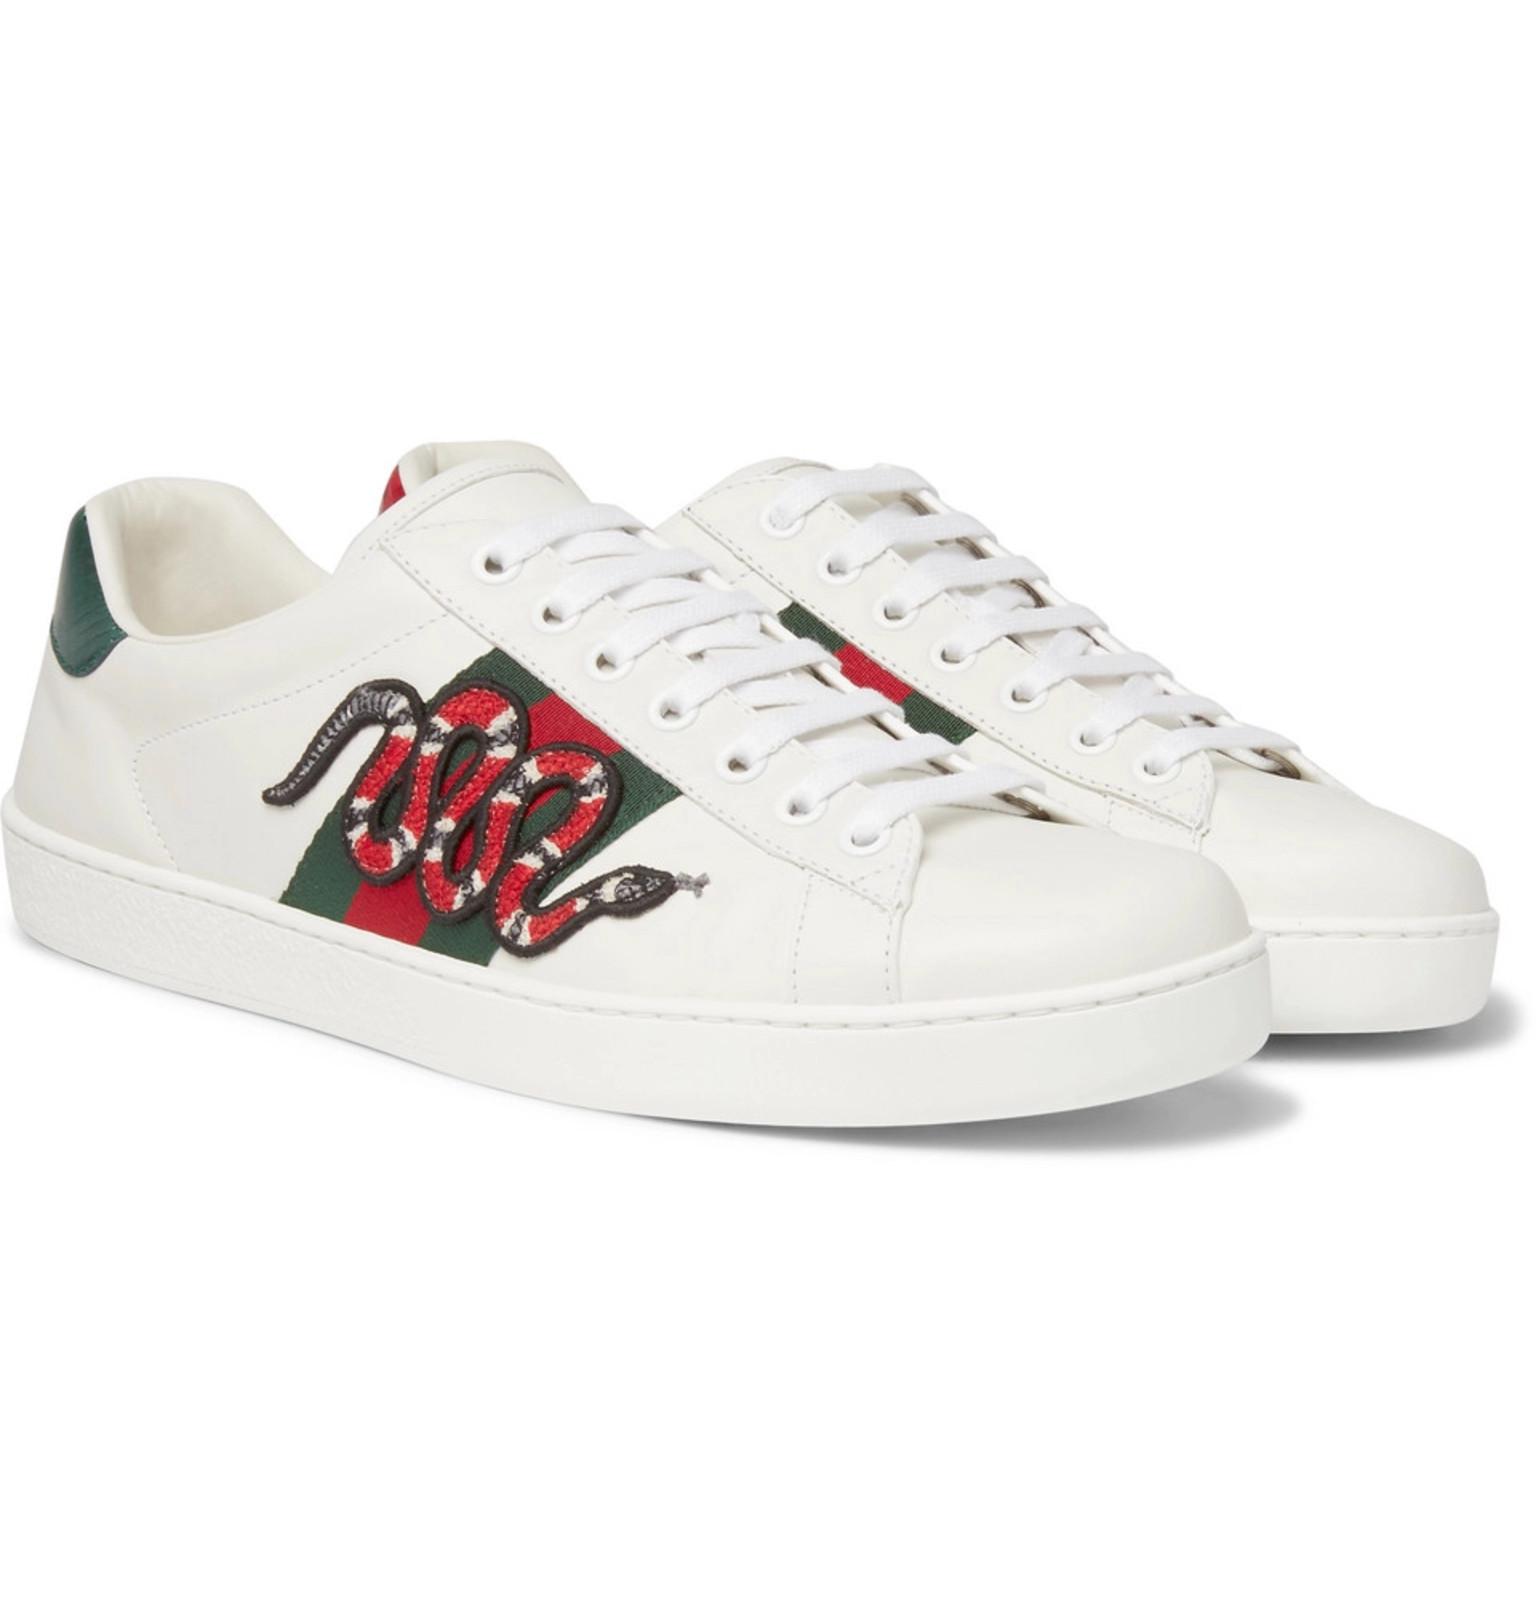 Gucci Snake Ace Embroidered Leather Sneaker in White for Men - Save 57% ...